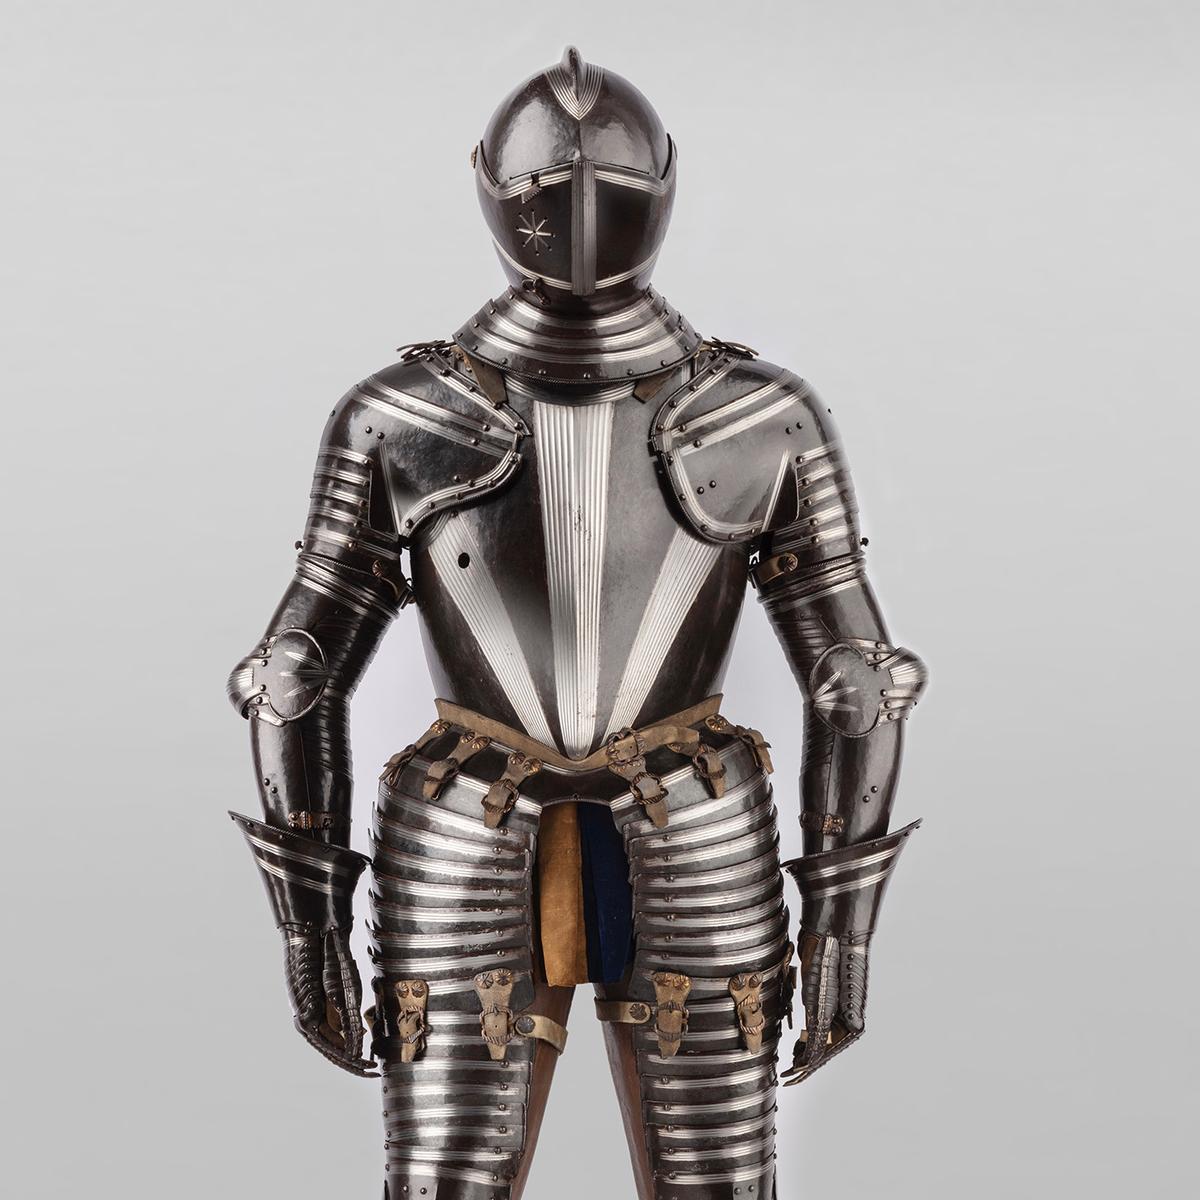 Field Armor, possibly made for Heinrich V, Duke of Brunswick-Wolfenbüttel, 1550, Steel and leather, Collection of Ronald S. Lauder, promised gift to The Metropolitan Museum of Art. Neue Gallerie, New York City. (<a href="https://www.neuegalerie.org/content/field-armor-possibly-made-heinrich-v-duke-brunswick-wolfenbuttel">Hulya Kolabas</a>)